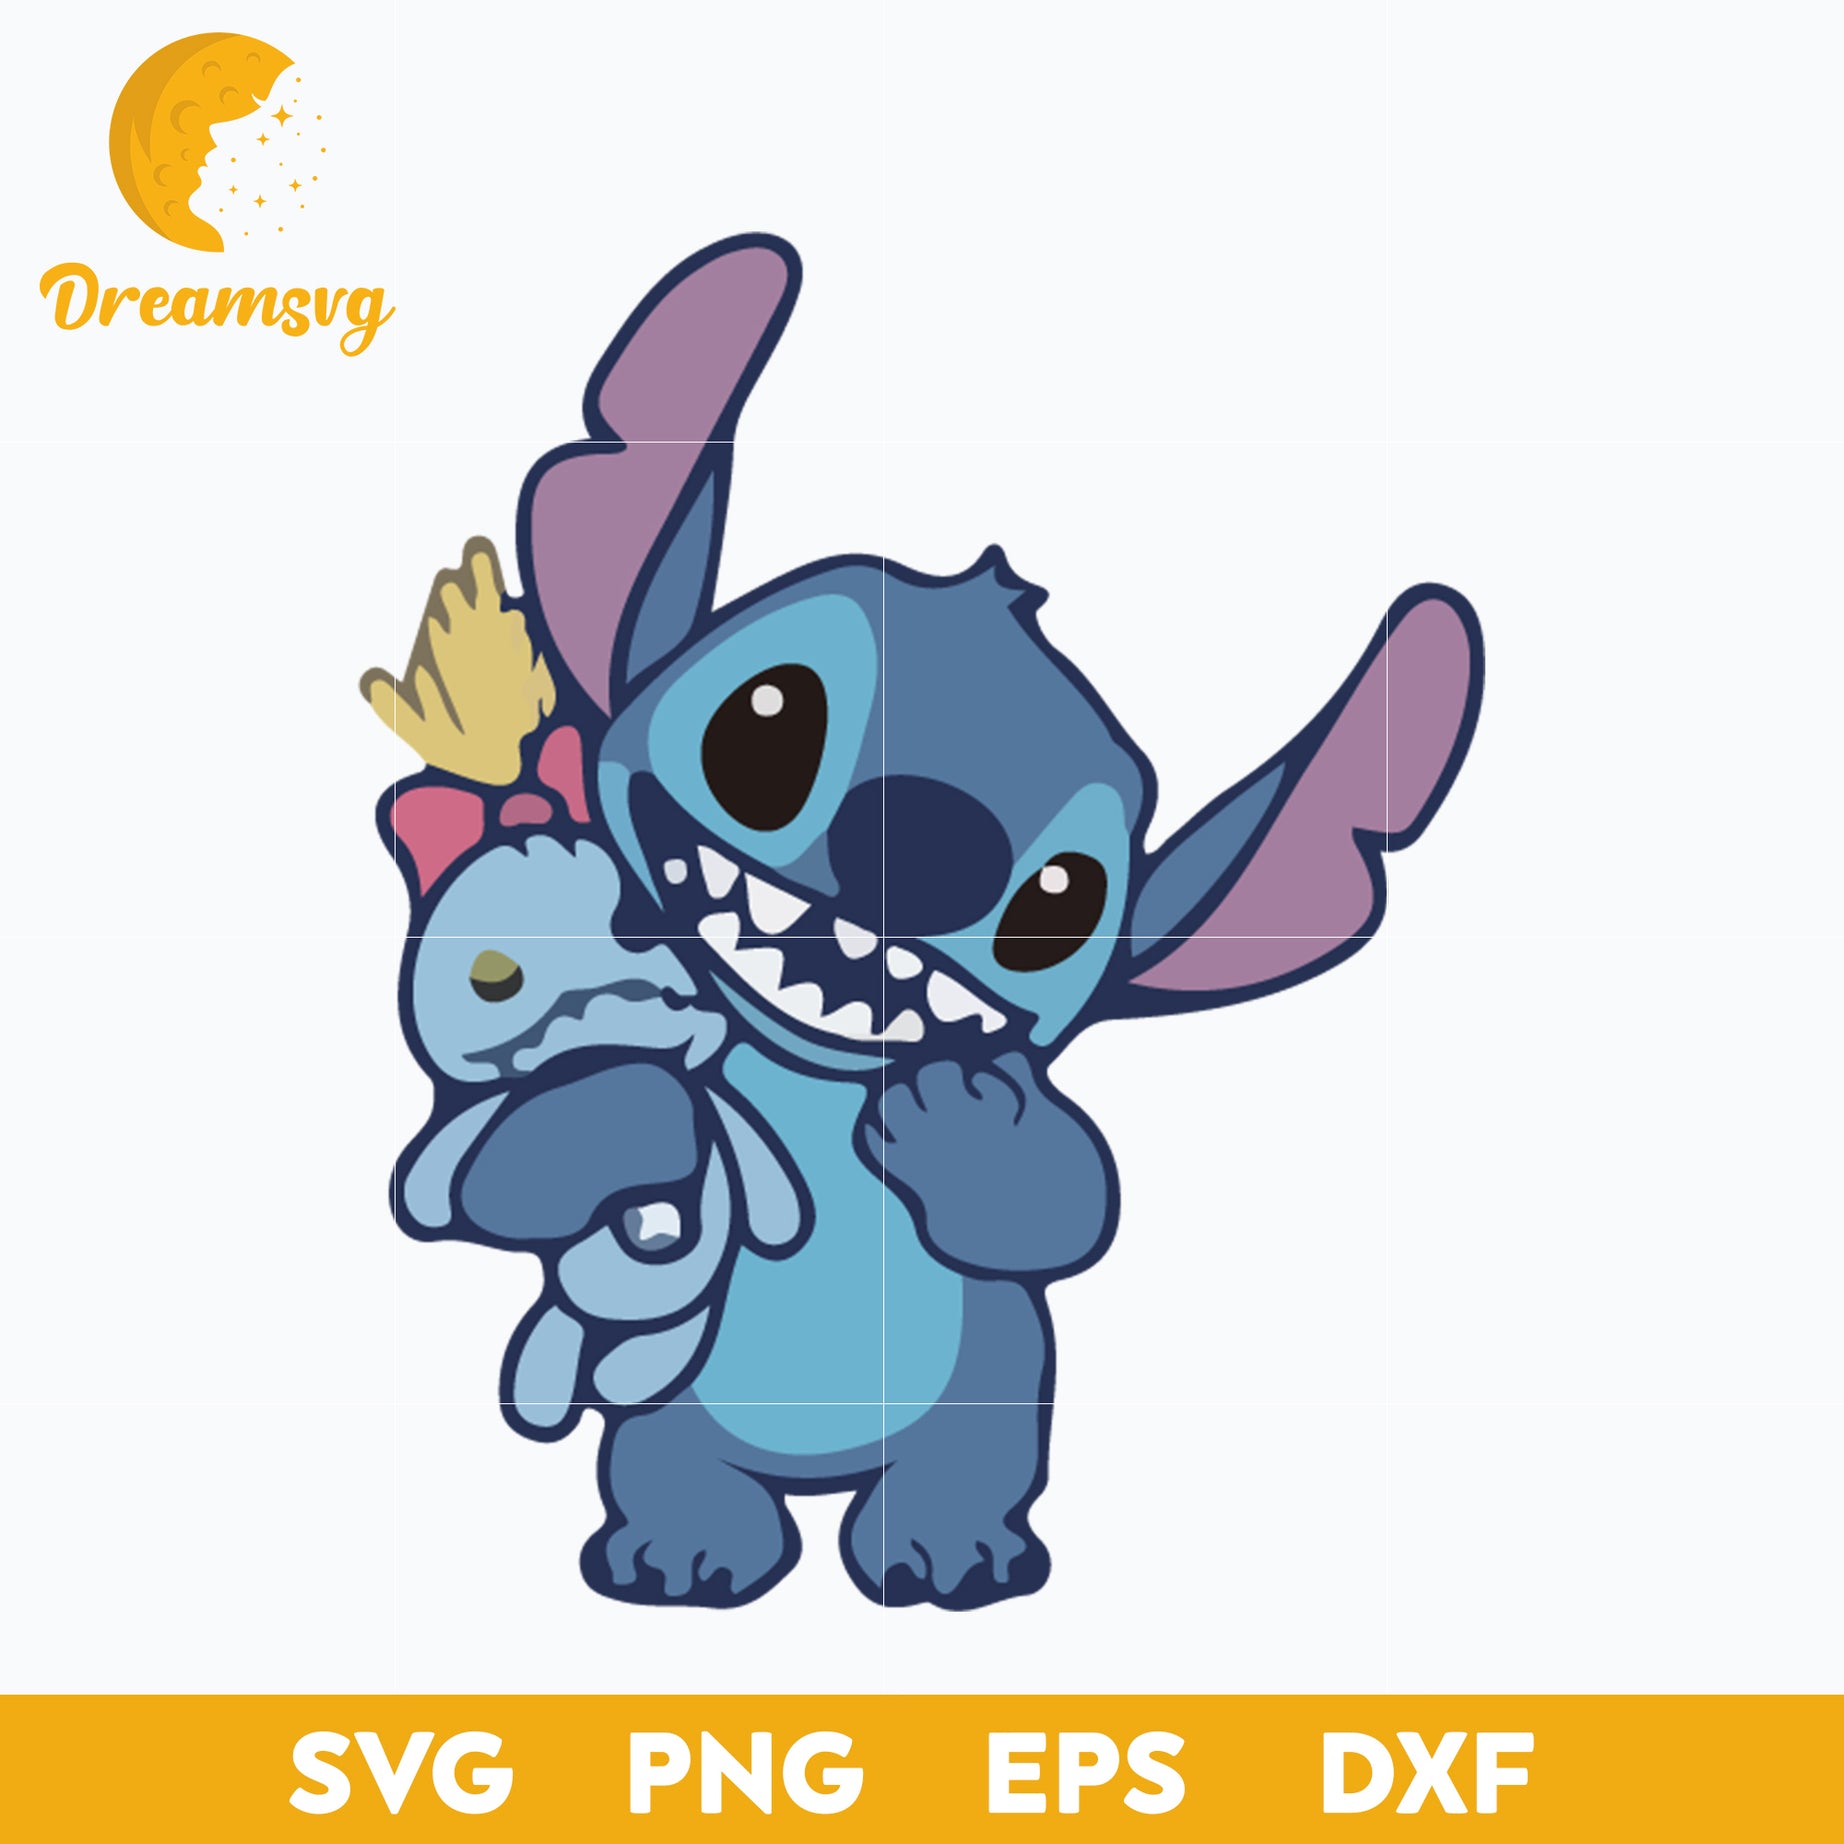 Stitch Birthday SVG dxf png clipart , cut file layered by color